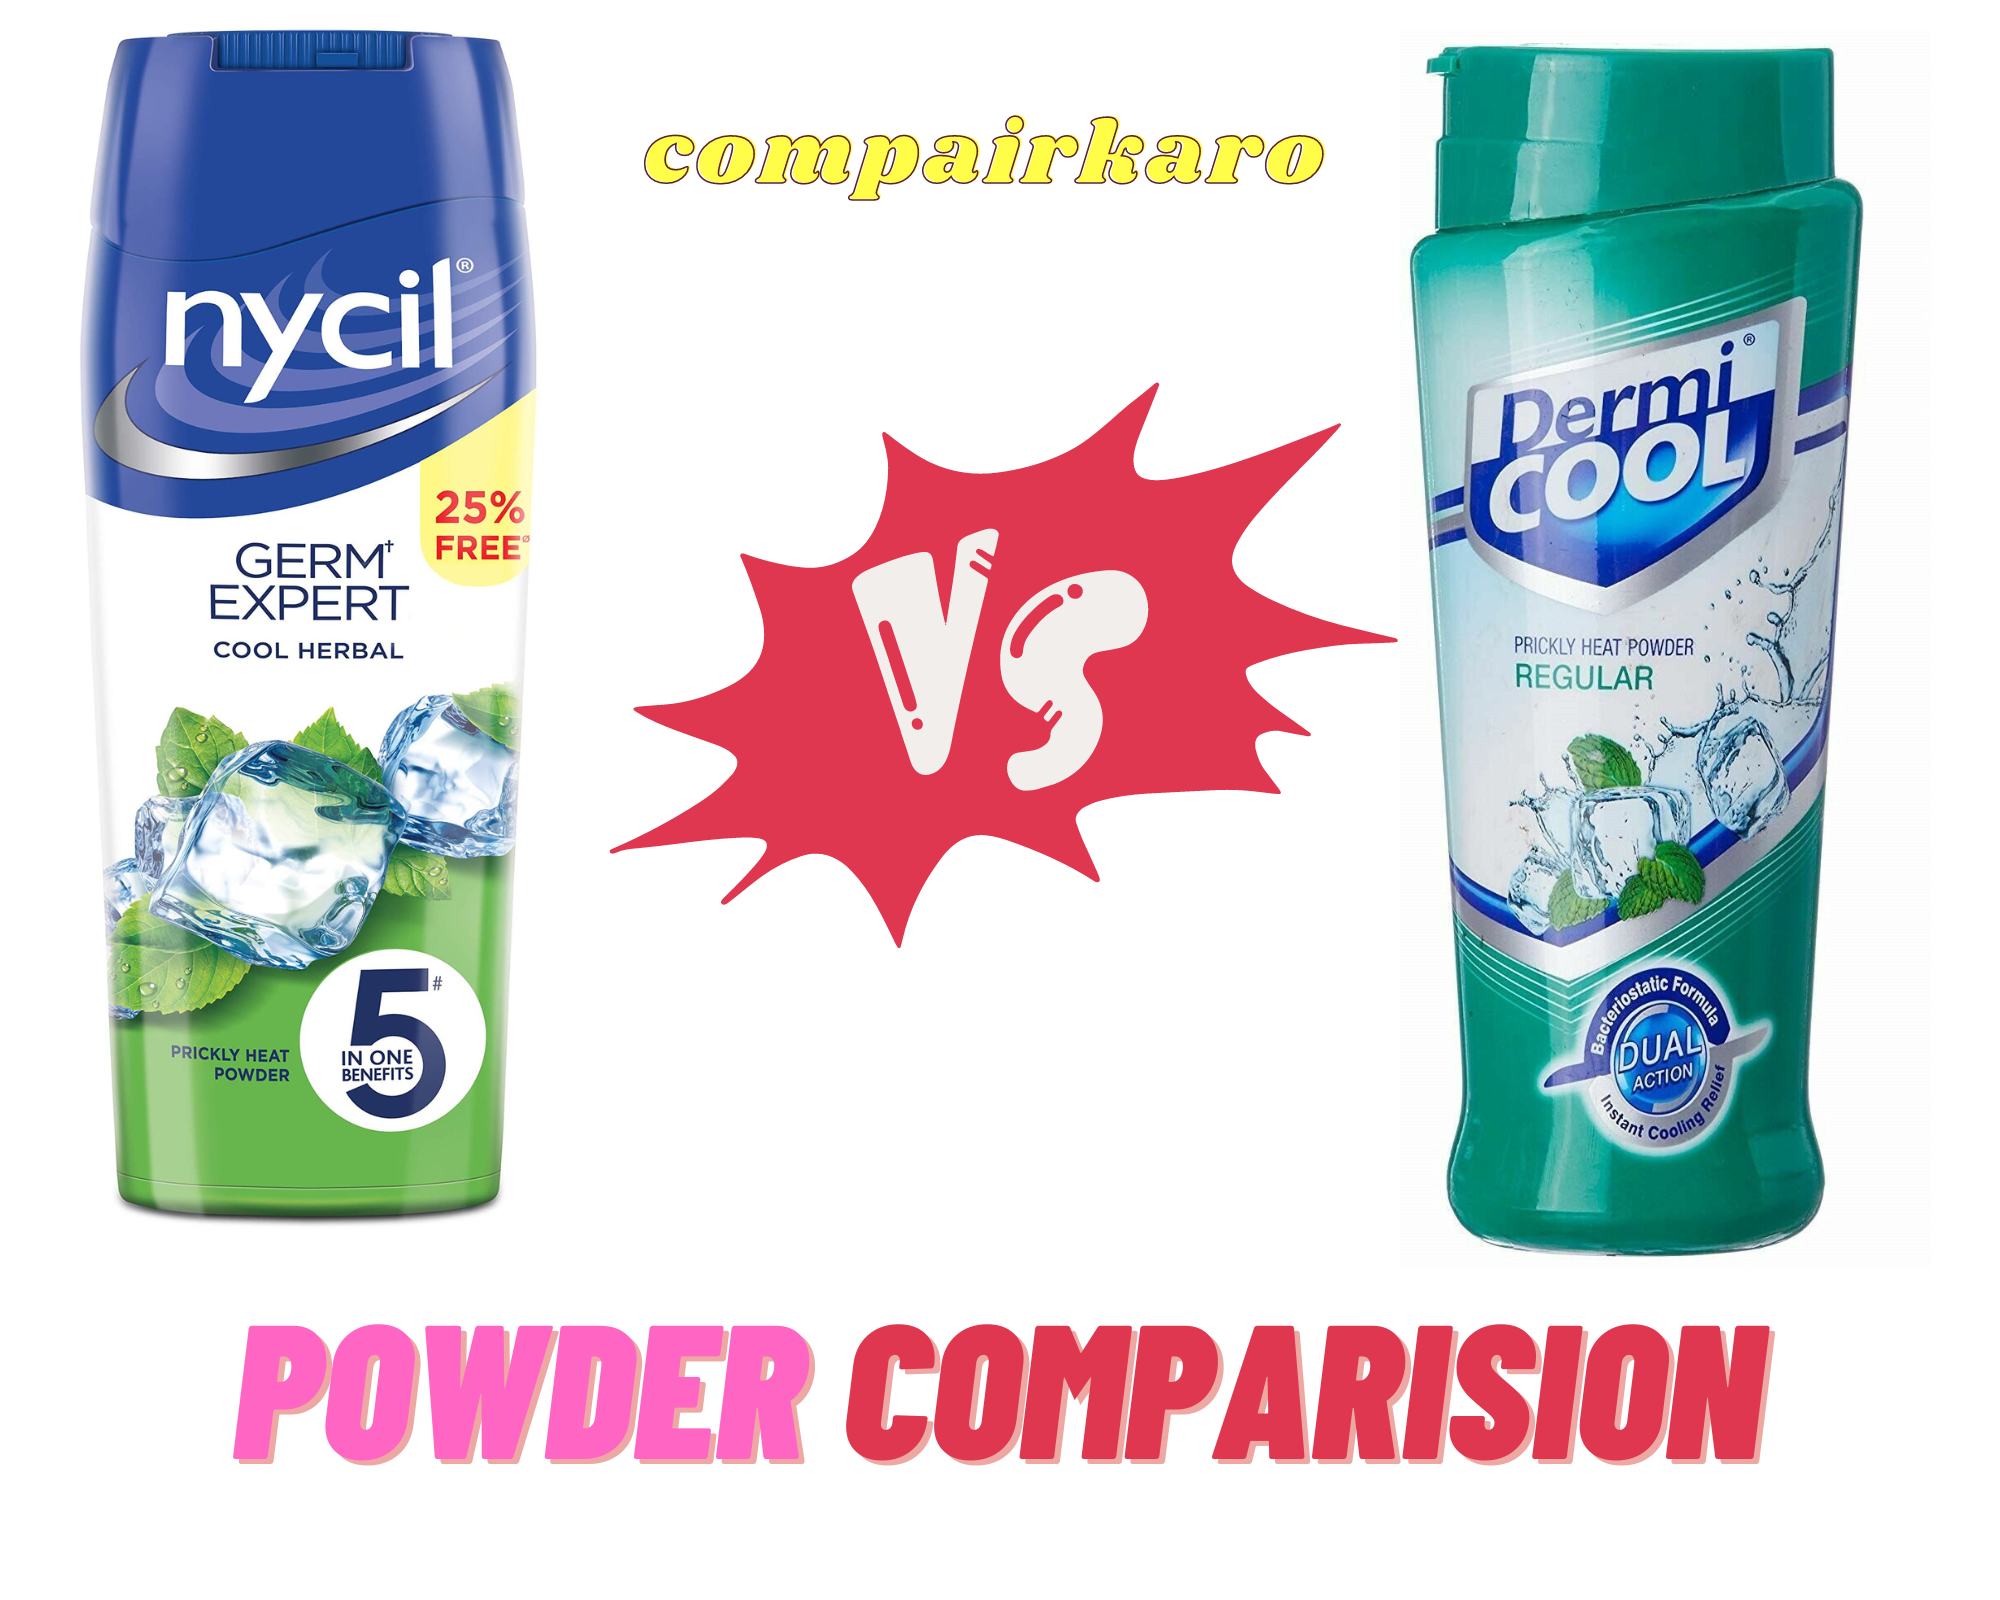 Nycil Vs Dermi COOL Which Is The Best Powder In Summer